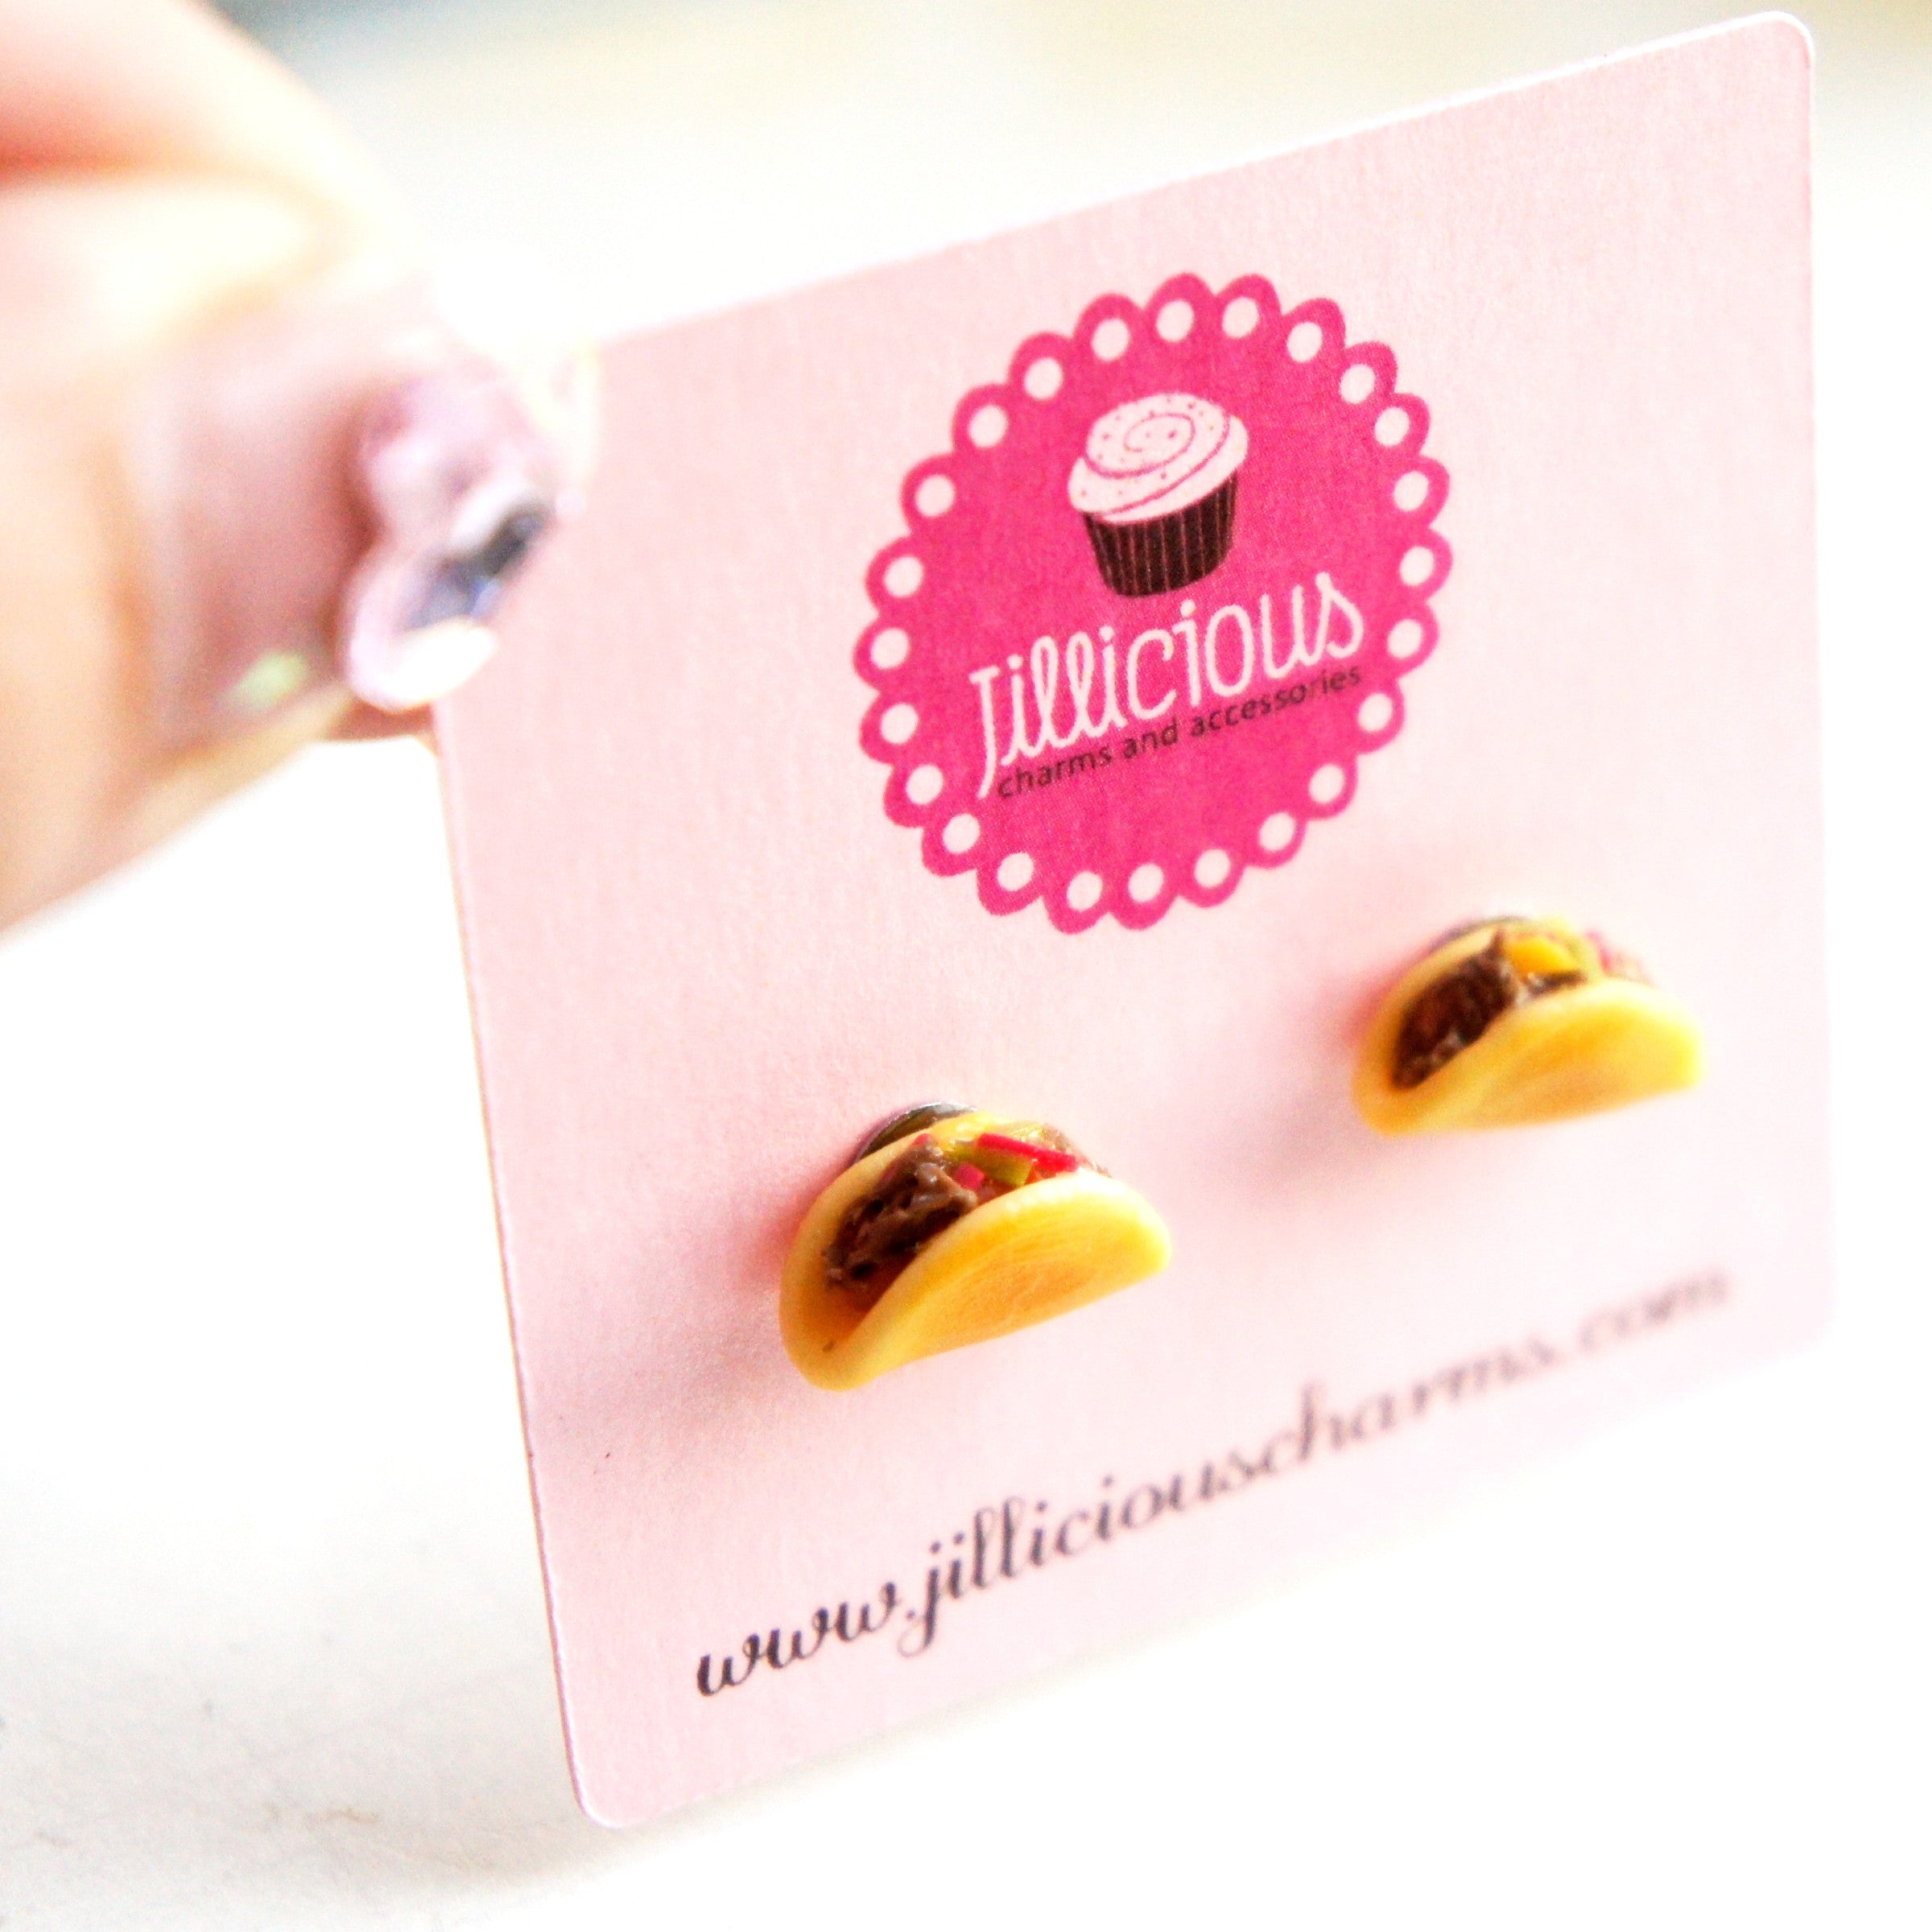 Tacos Stud Earrings - Jillicious charms and accessories